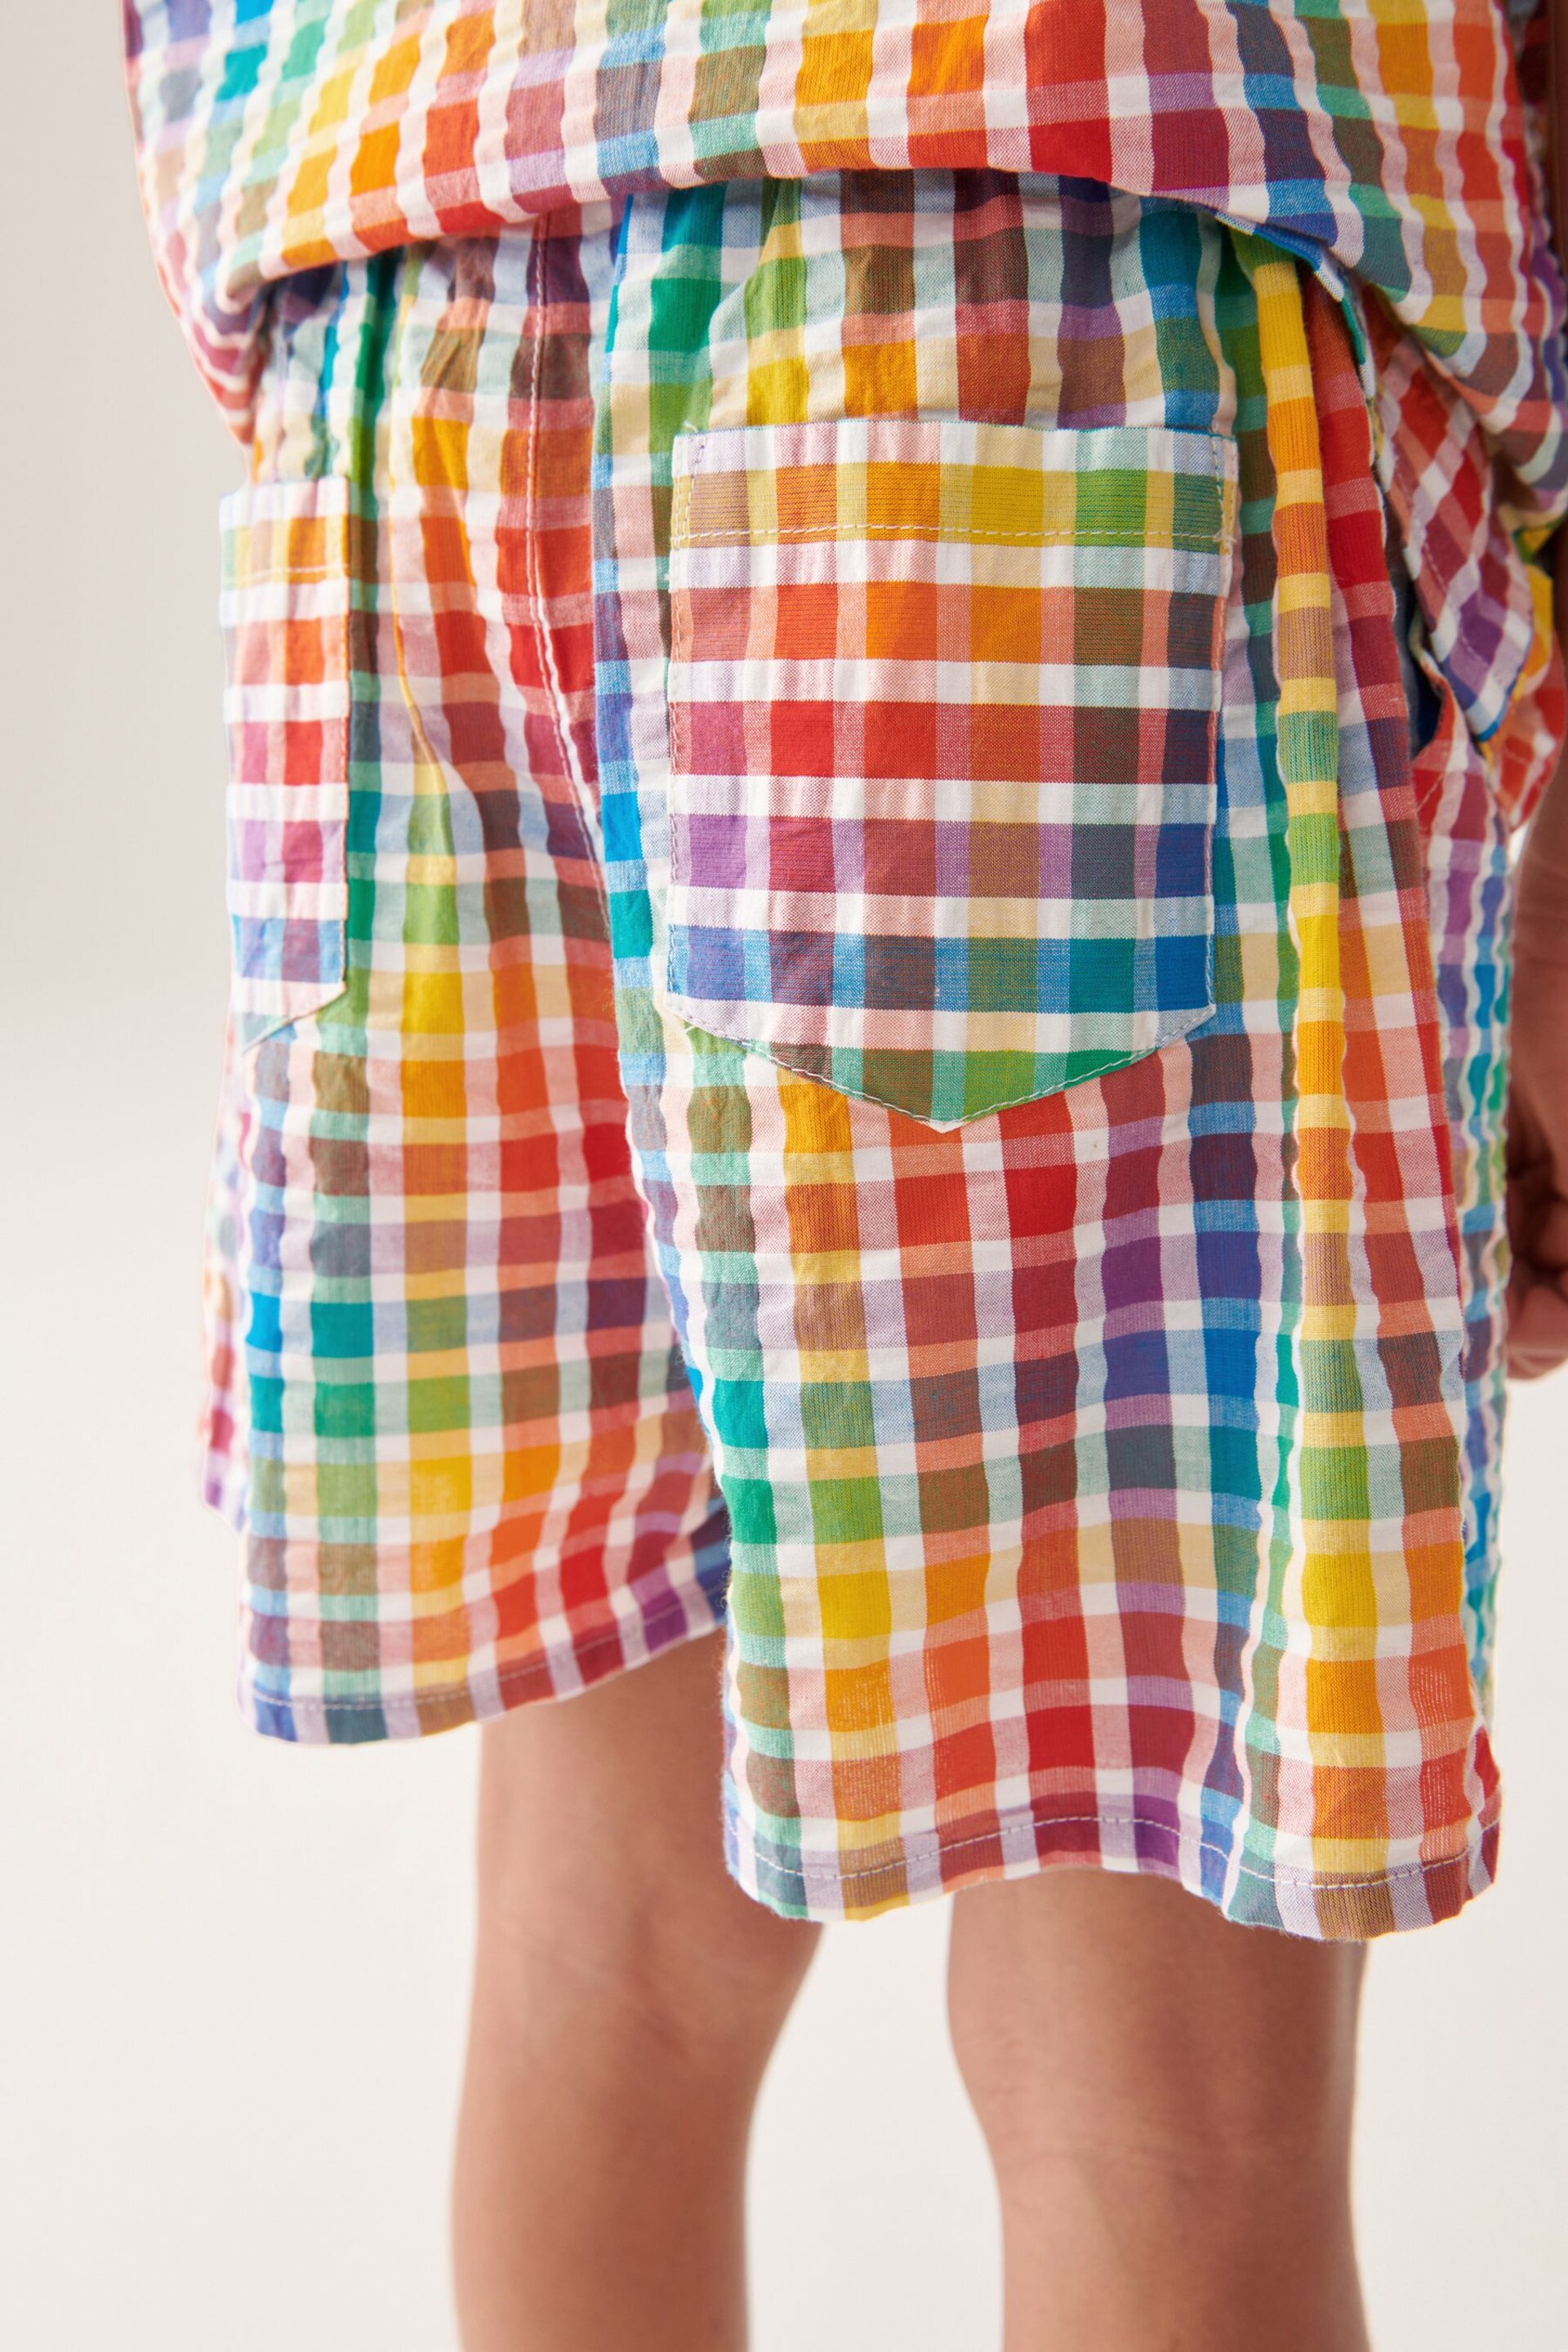 Little Bird by Jools Oliver Multi/Check Colourful Shirt and Short Set - Image 6 of 10